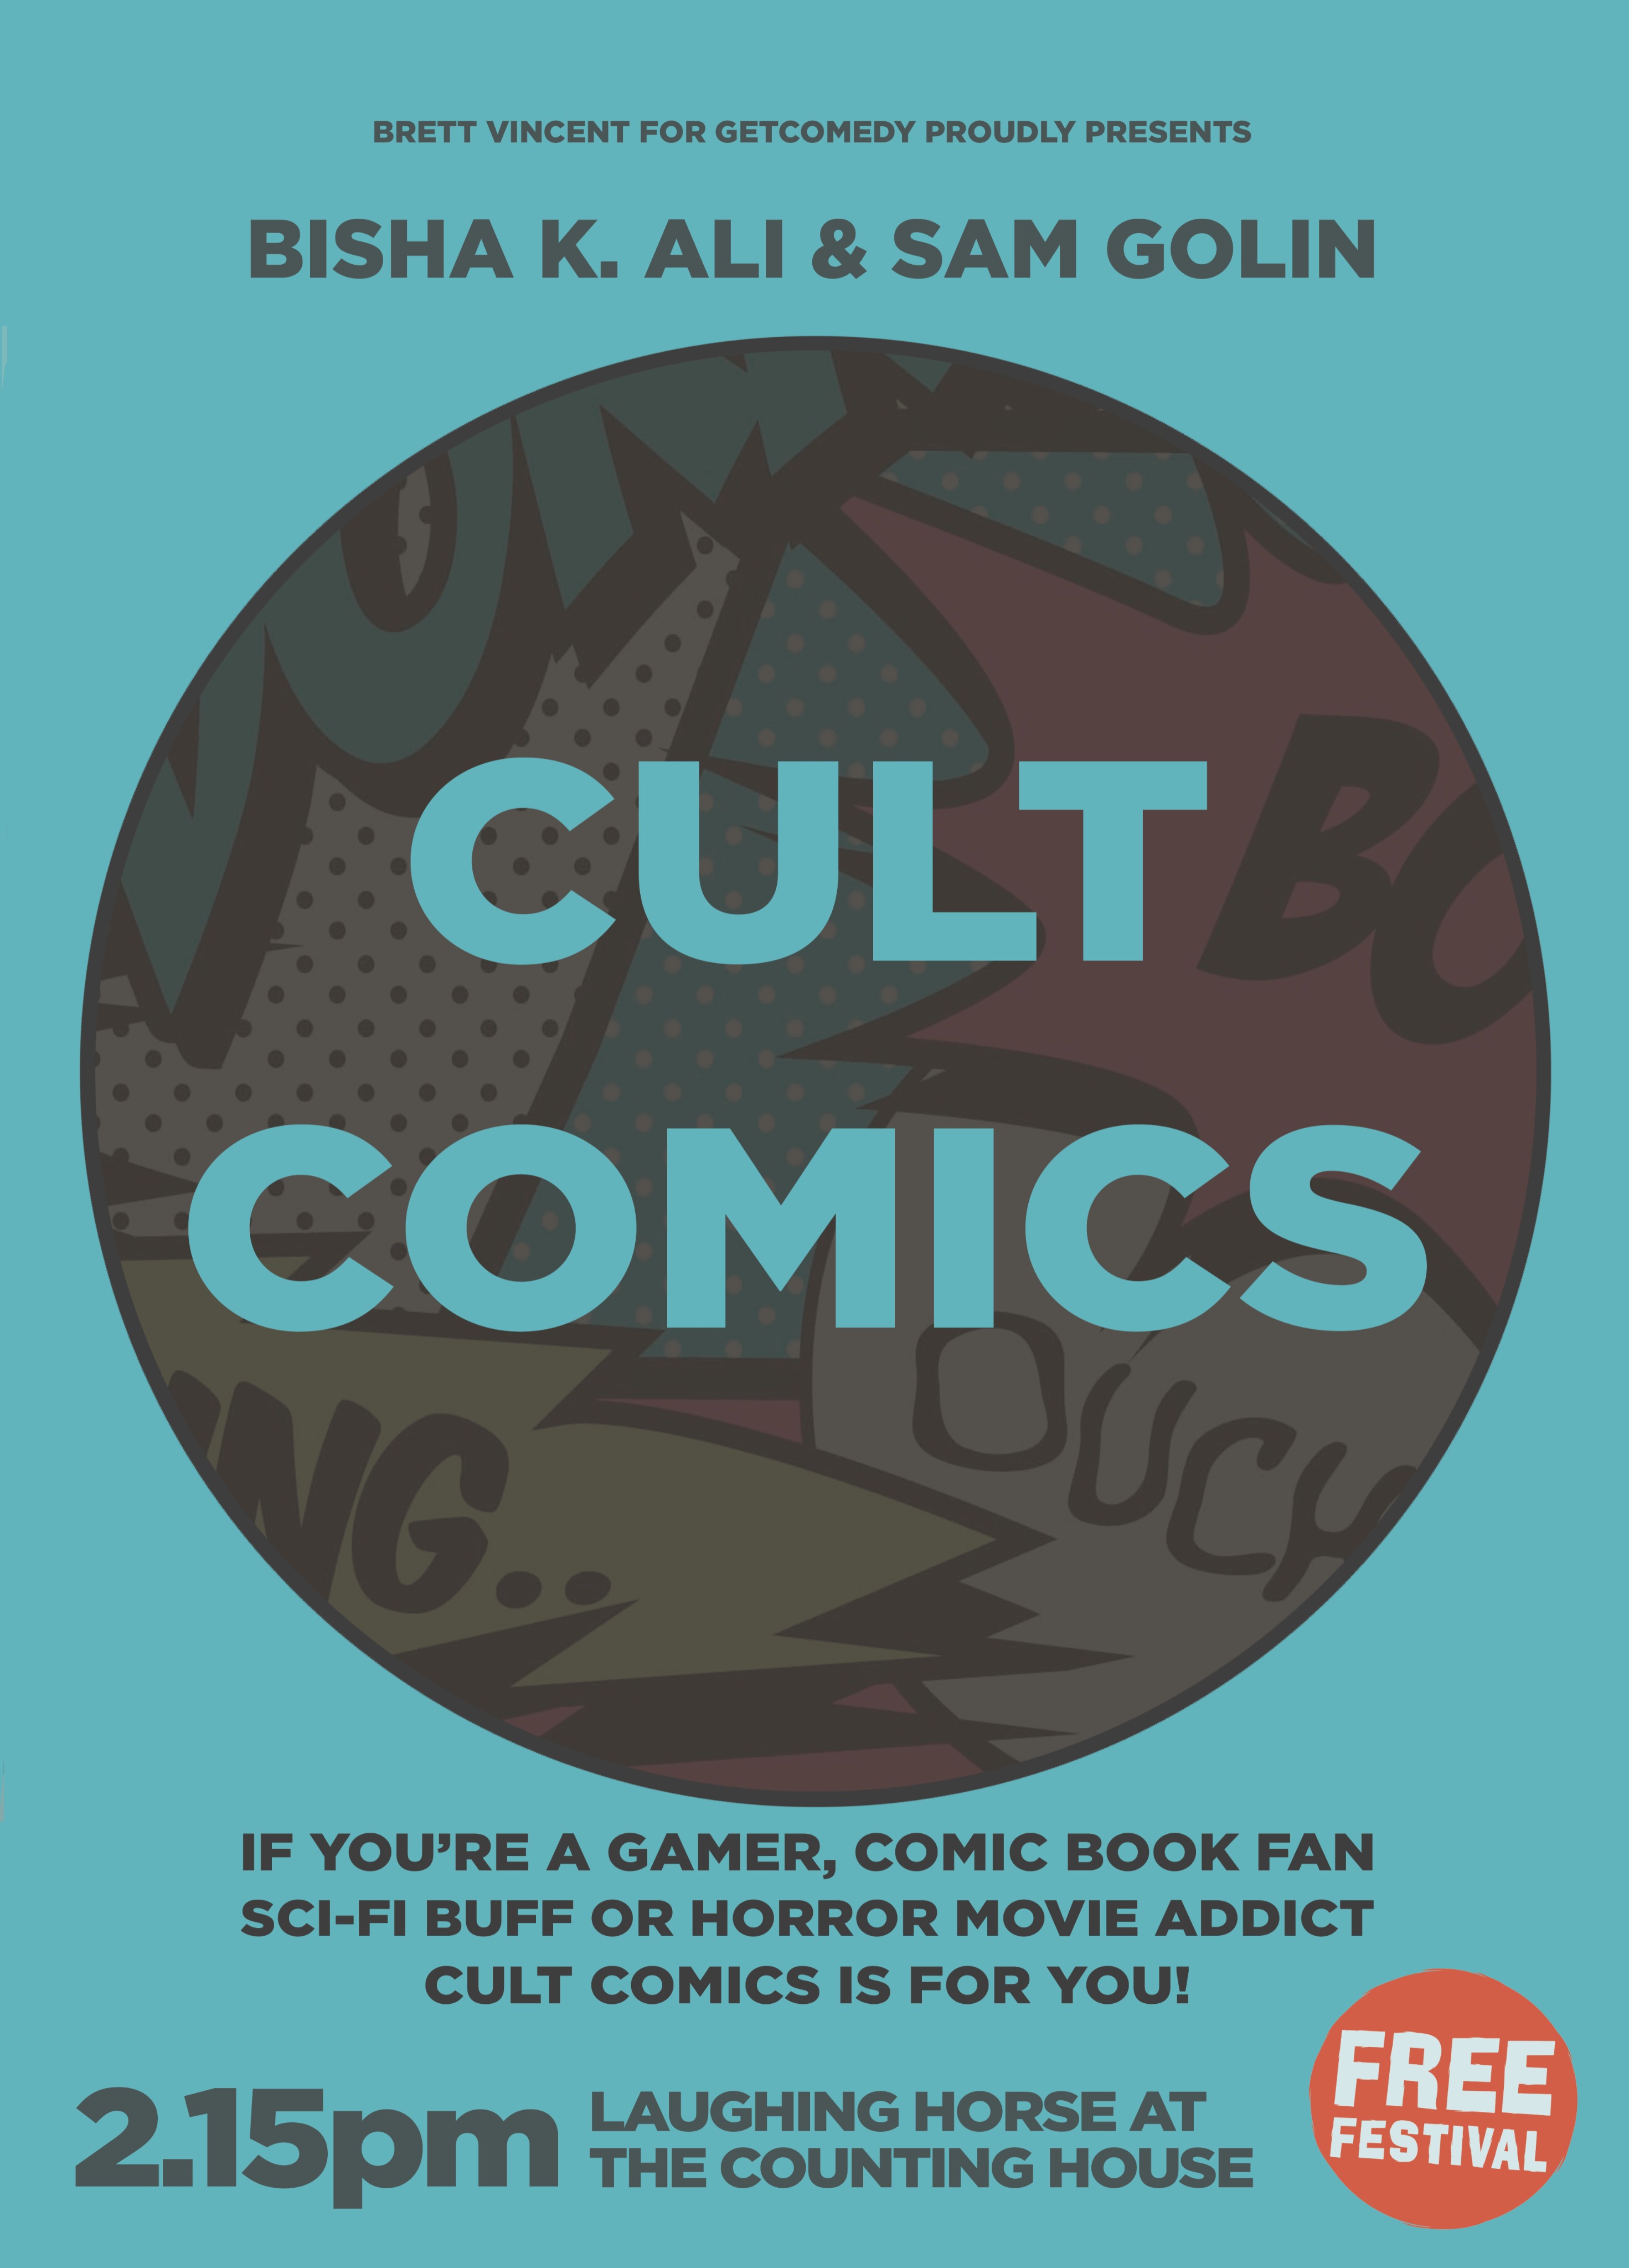 The poster for Cult Comics